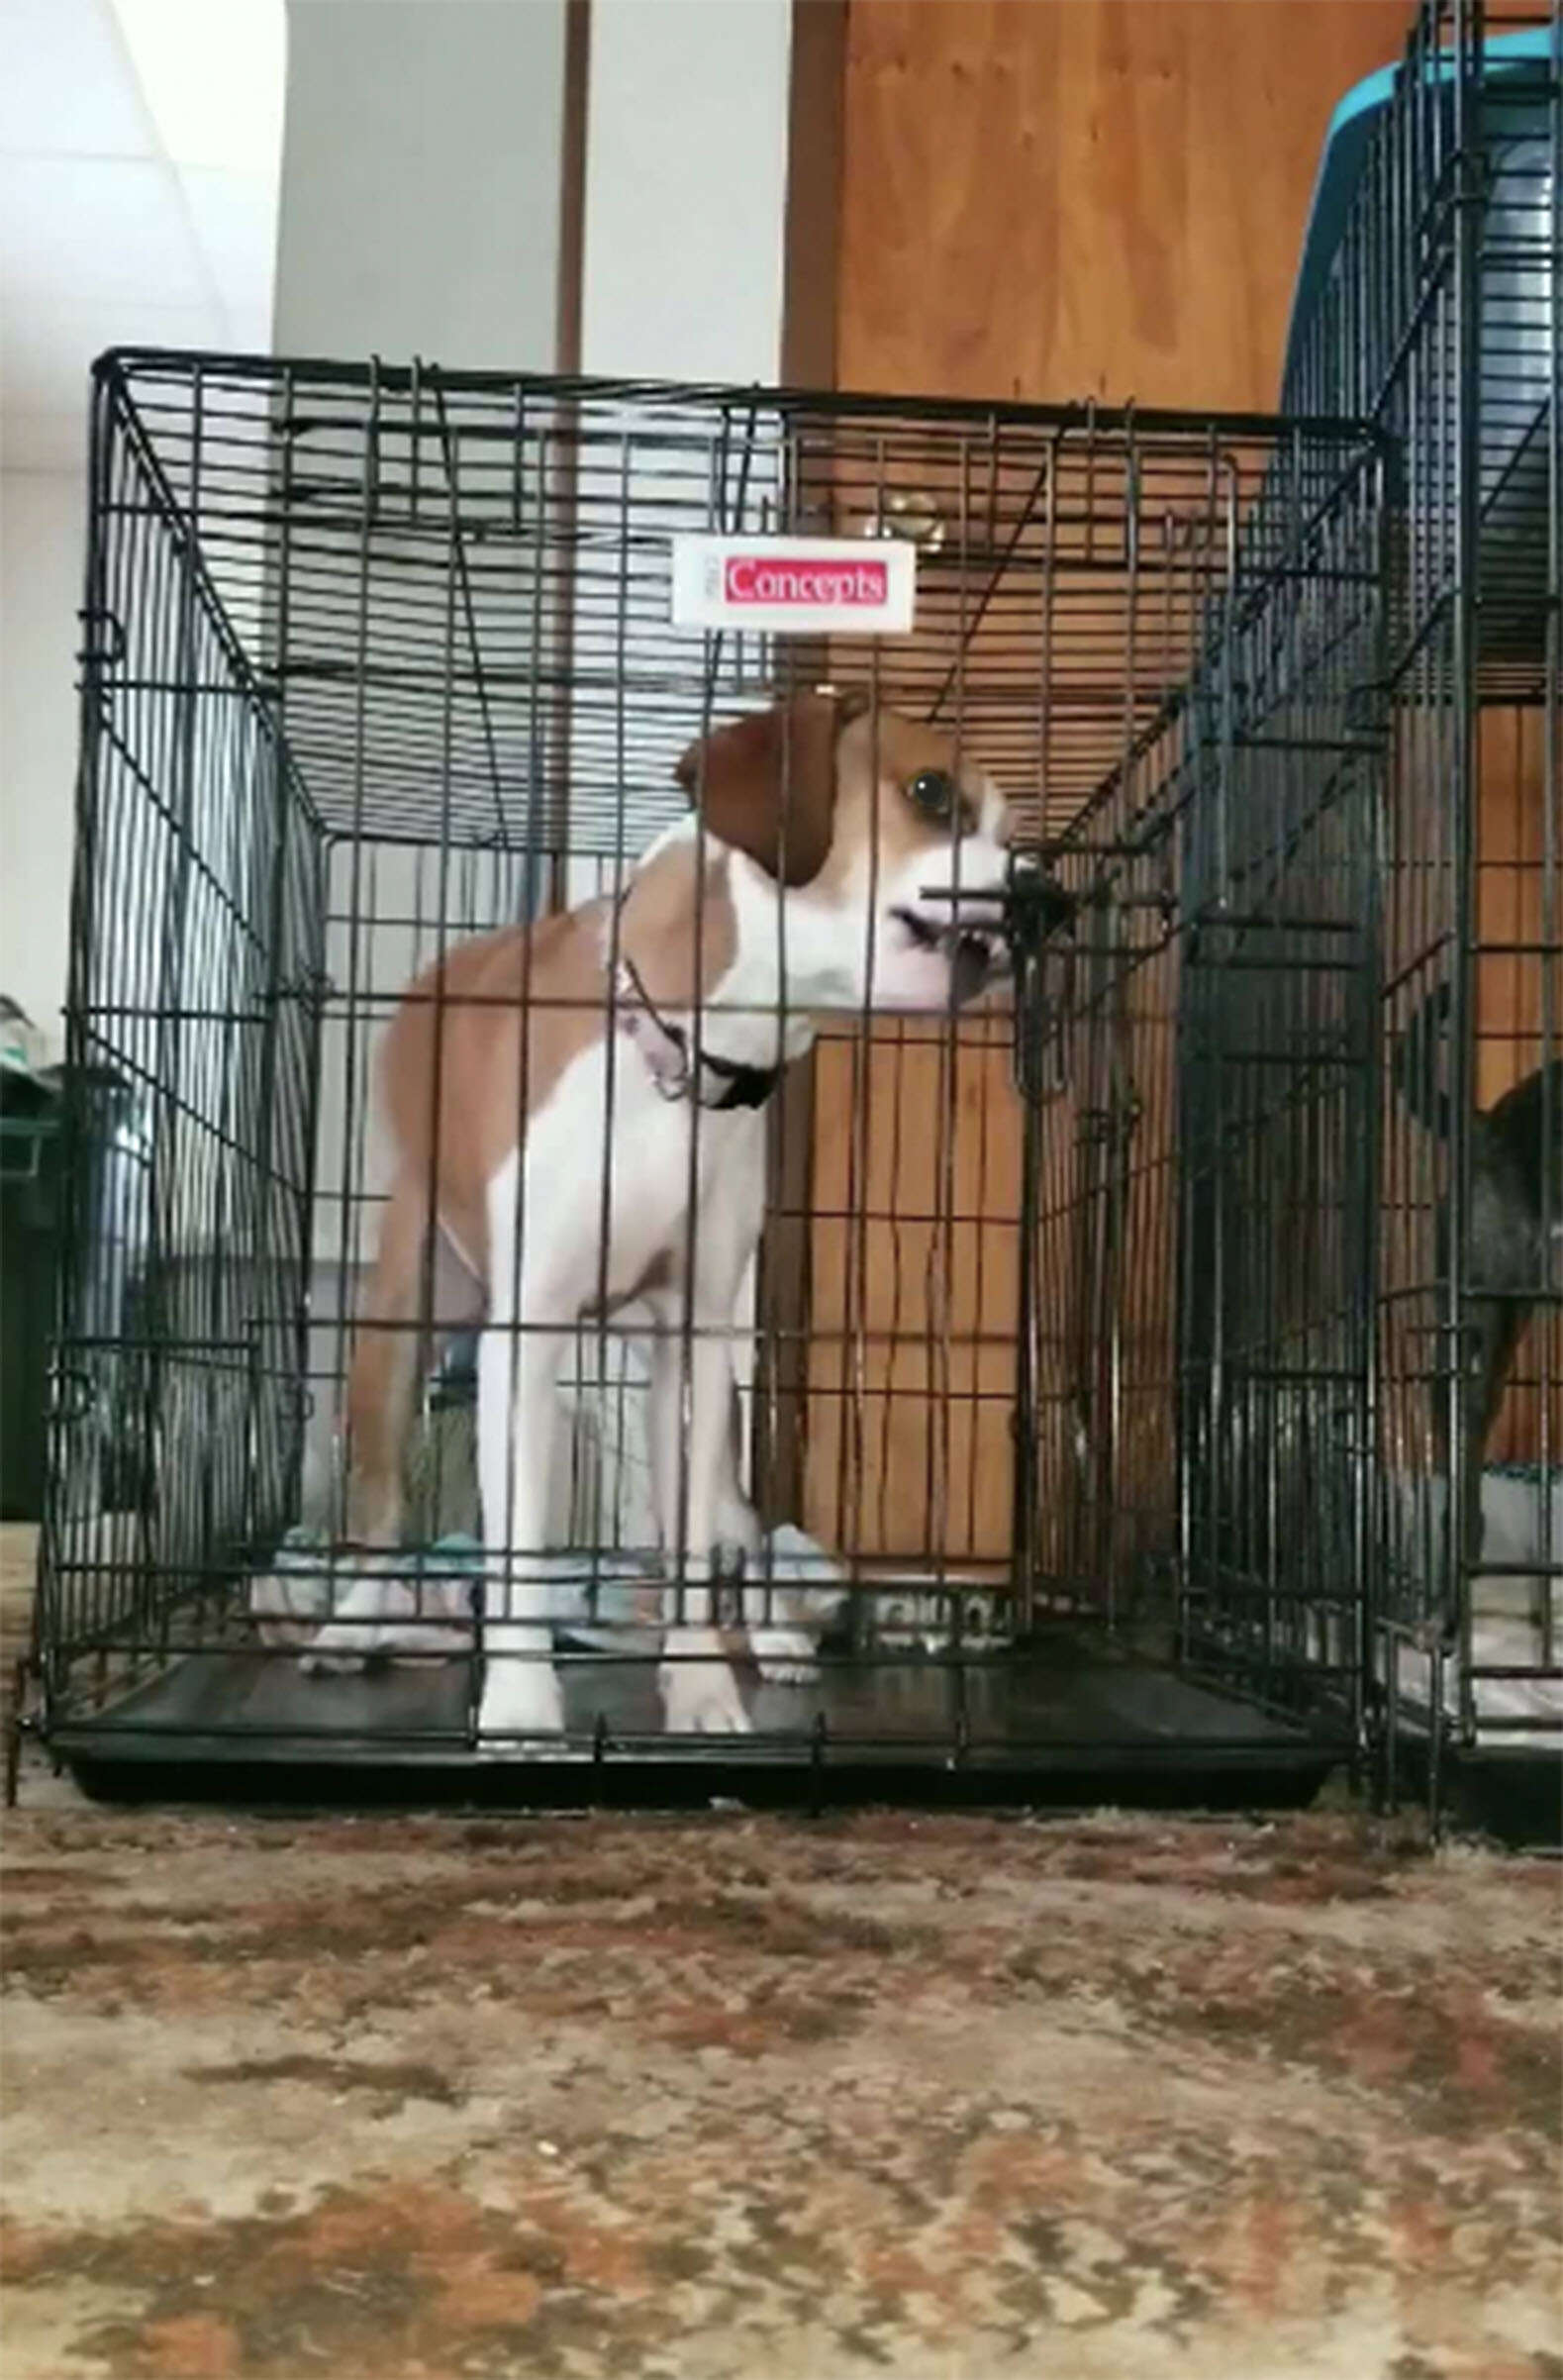 Nova the Borden terrier breaks out of her cage